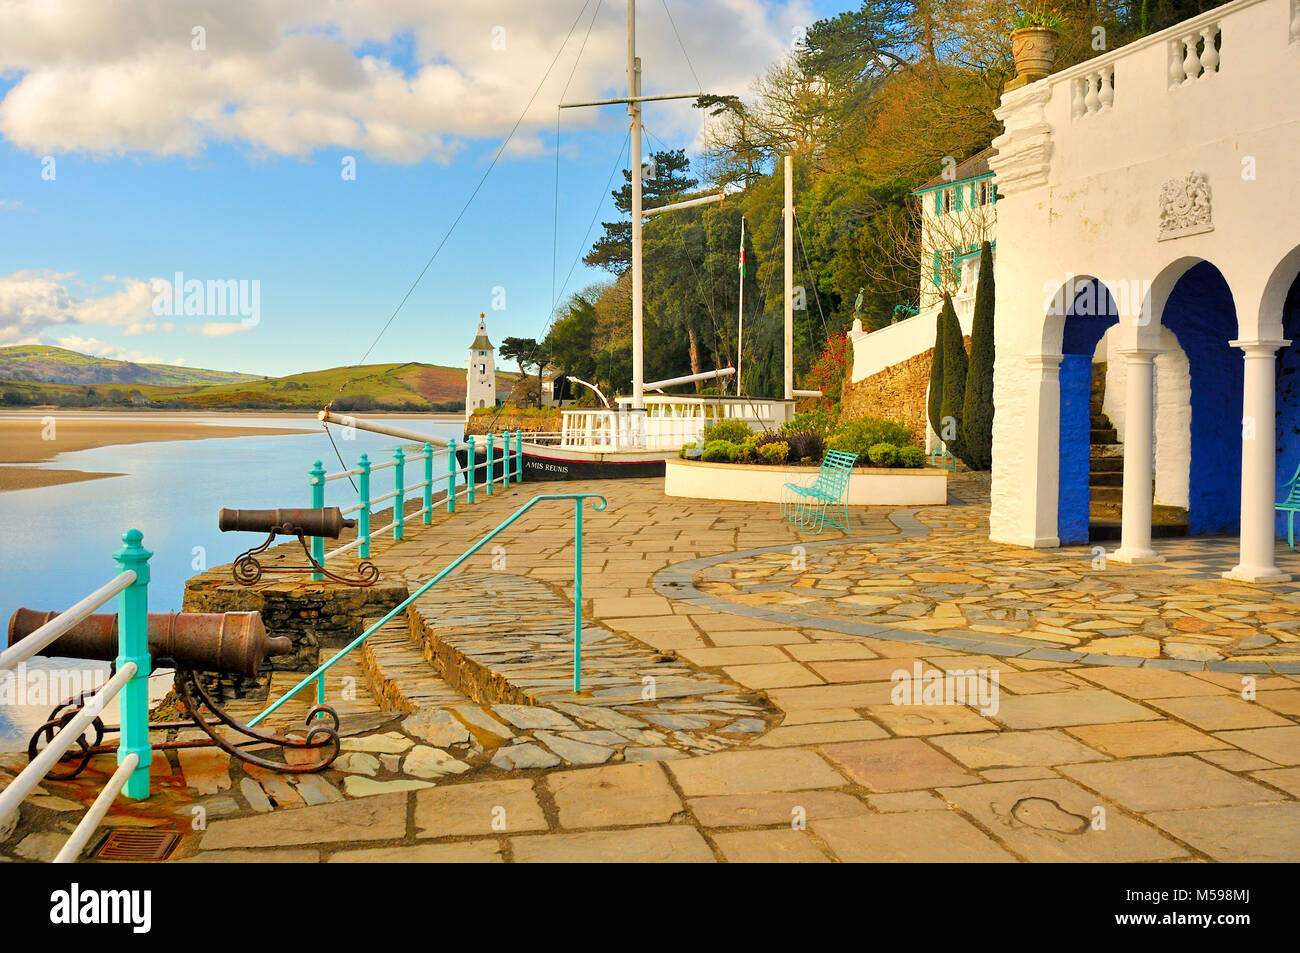 A view across the bay at Portmeirion, North Wales, showing the stone boat Stock Photo